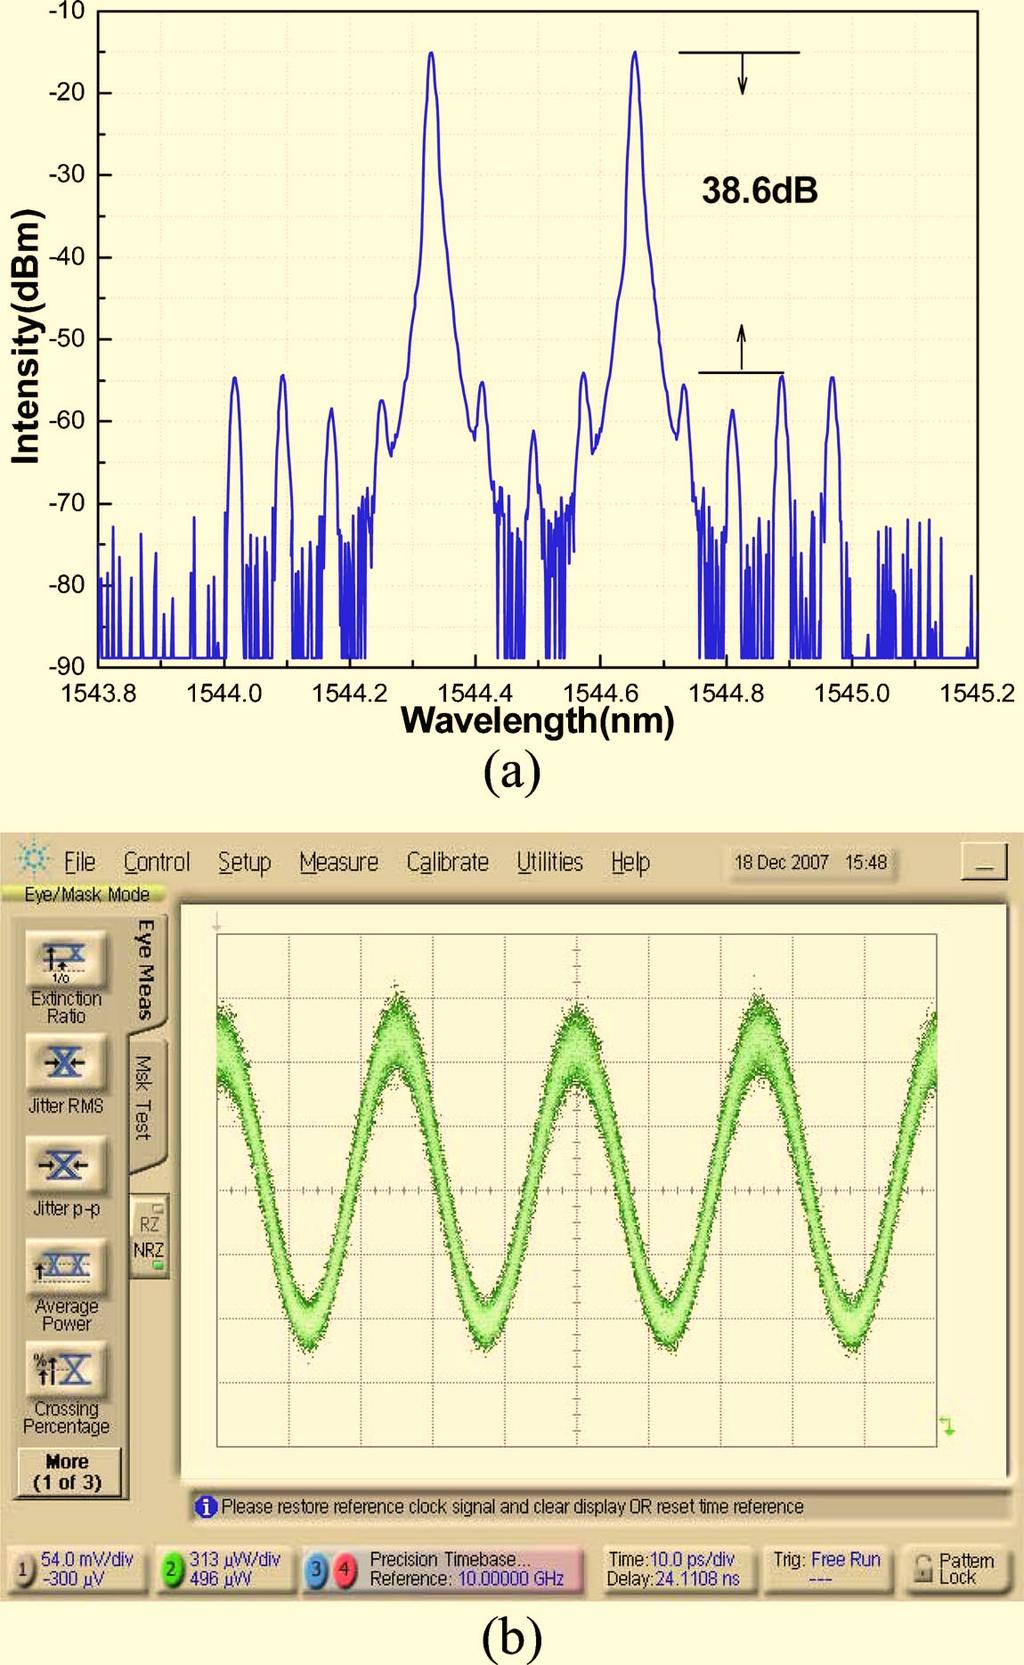 Vol. 8, No. 2 / February 2009 / JOURNAL OF OPTICAL NETWORKING 192 Fig. 2. Experimental results of the 40 GHz optical millimeter-wave signal. (a) Optical spectrum. The resolution is 0.01 nm.